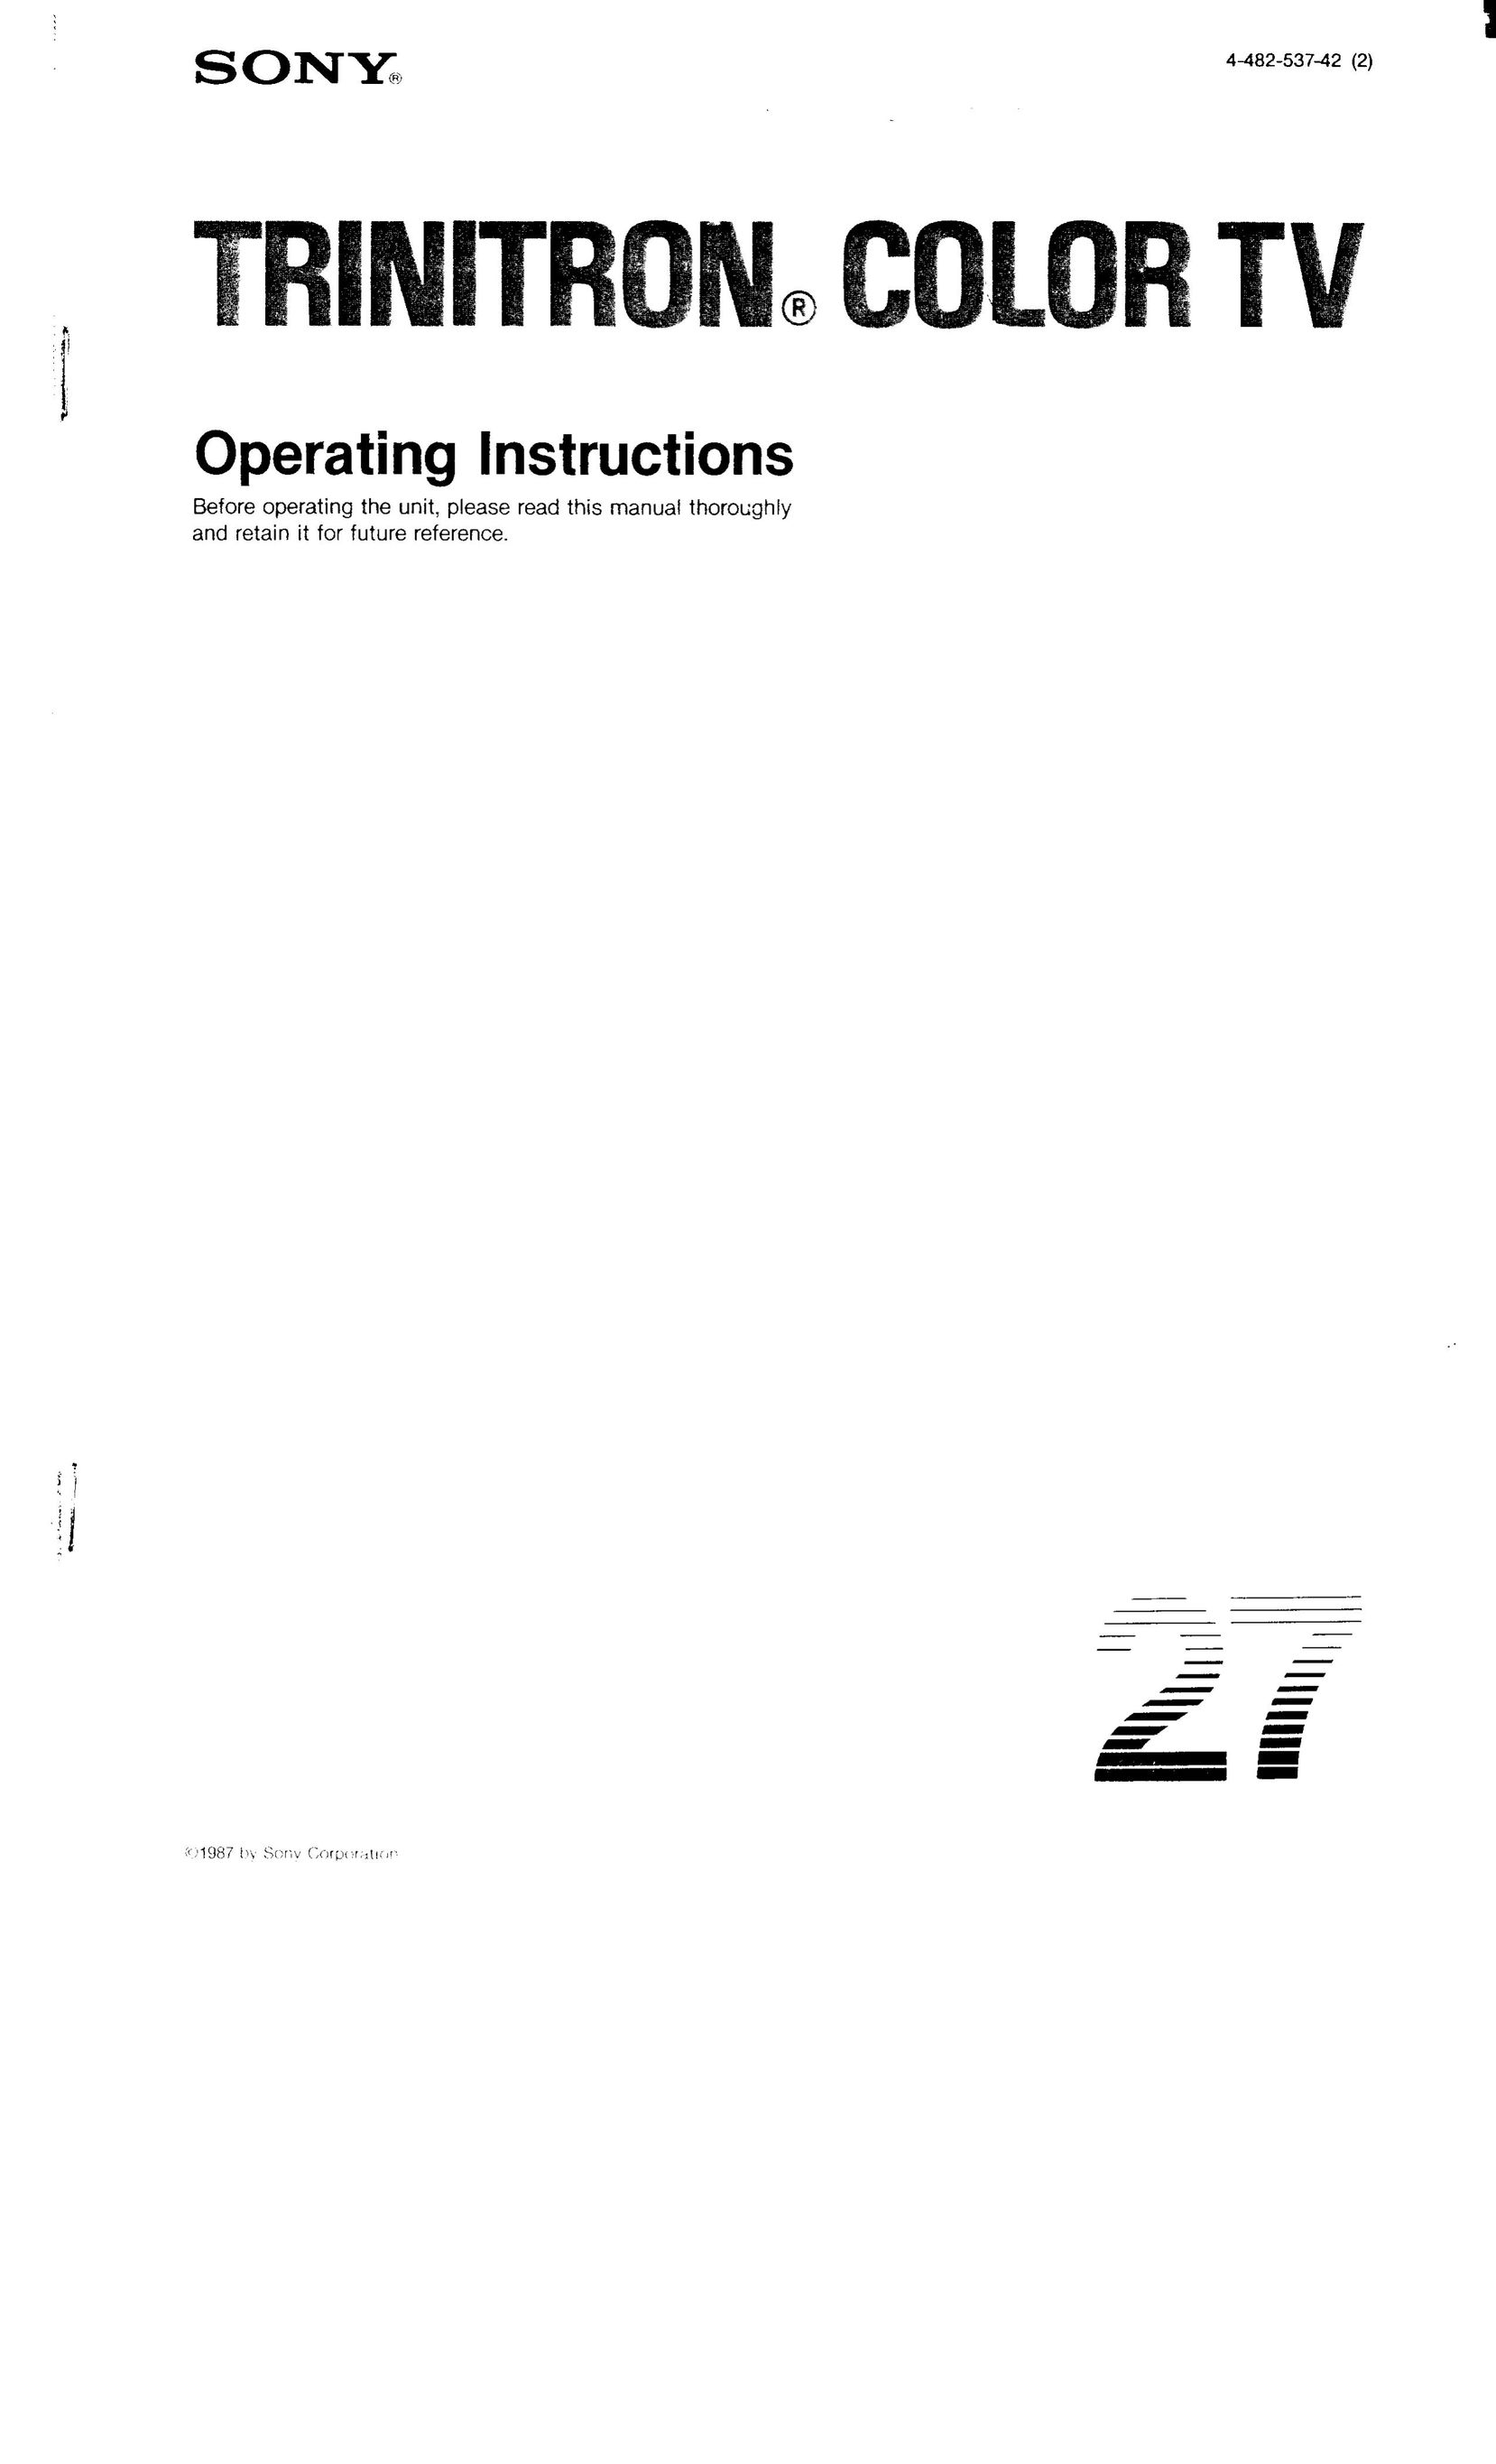 Sony 27 CRT Television User Manual